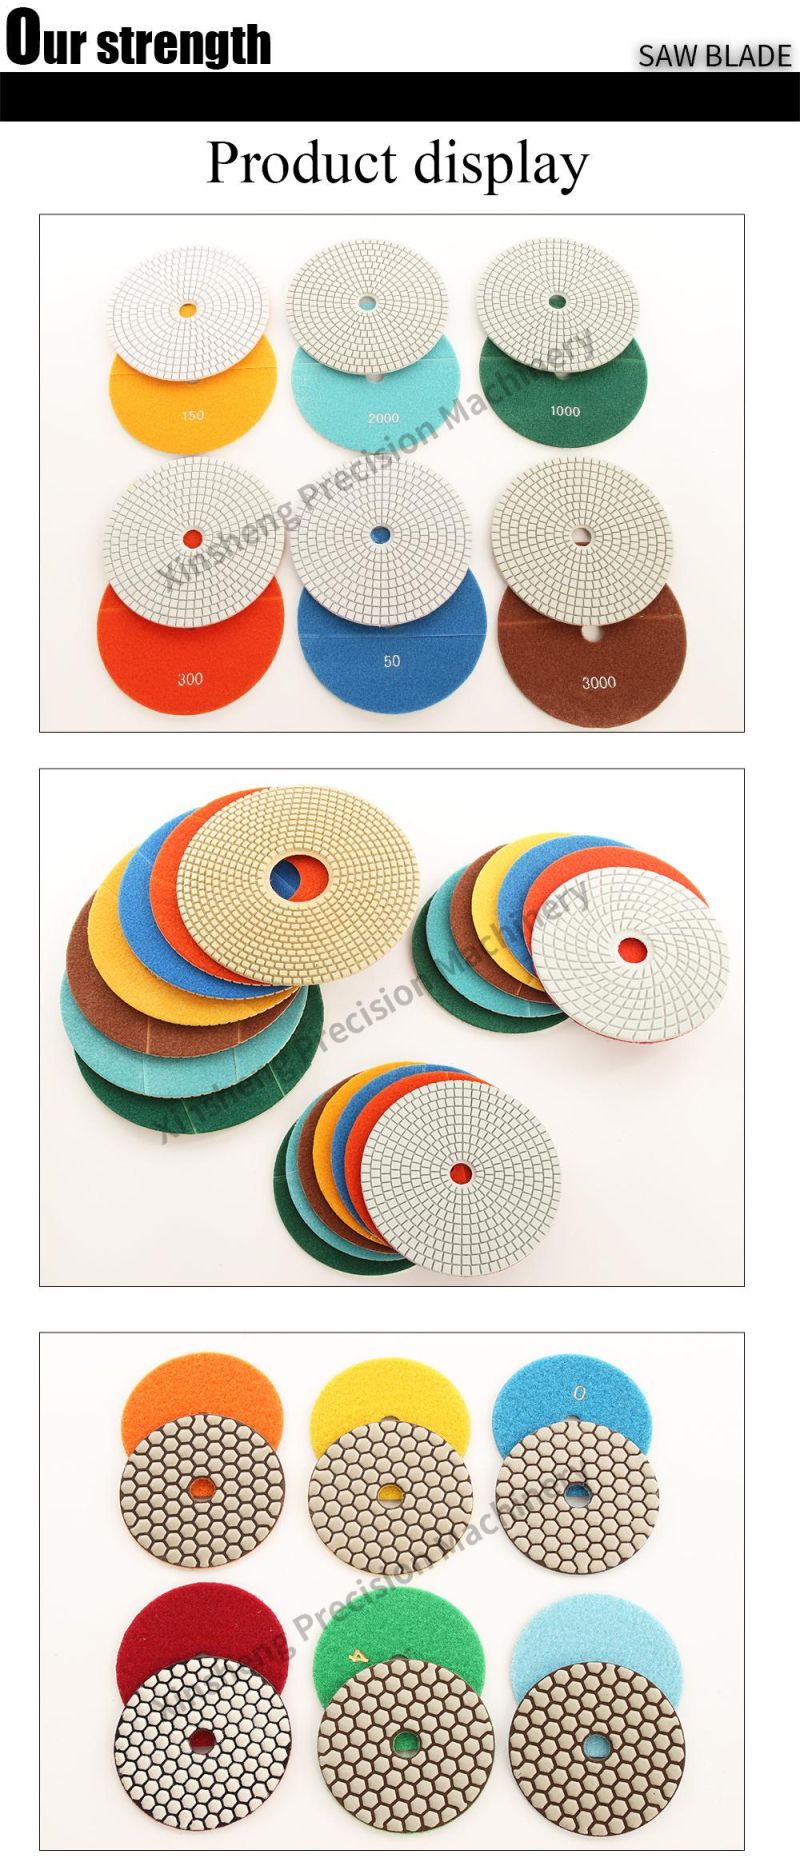 4 Inch Wet Diamond Polishing Pads for Marble Granite Engineered Stone and Concrete